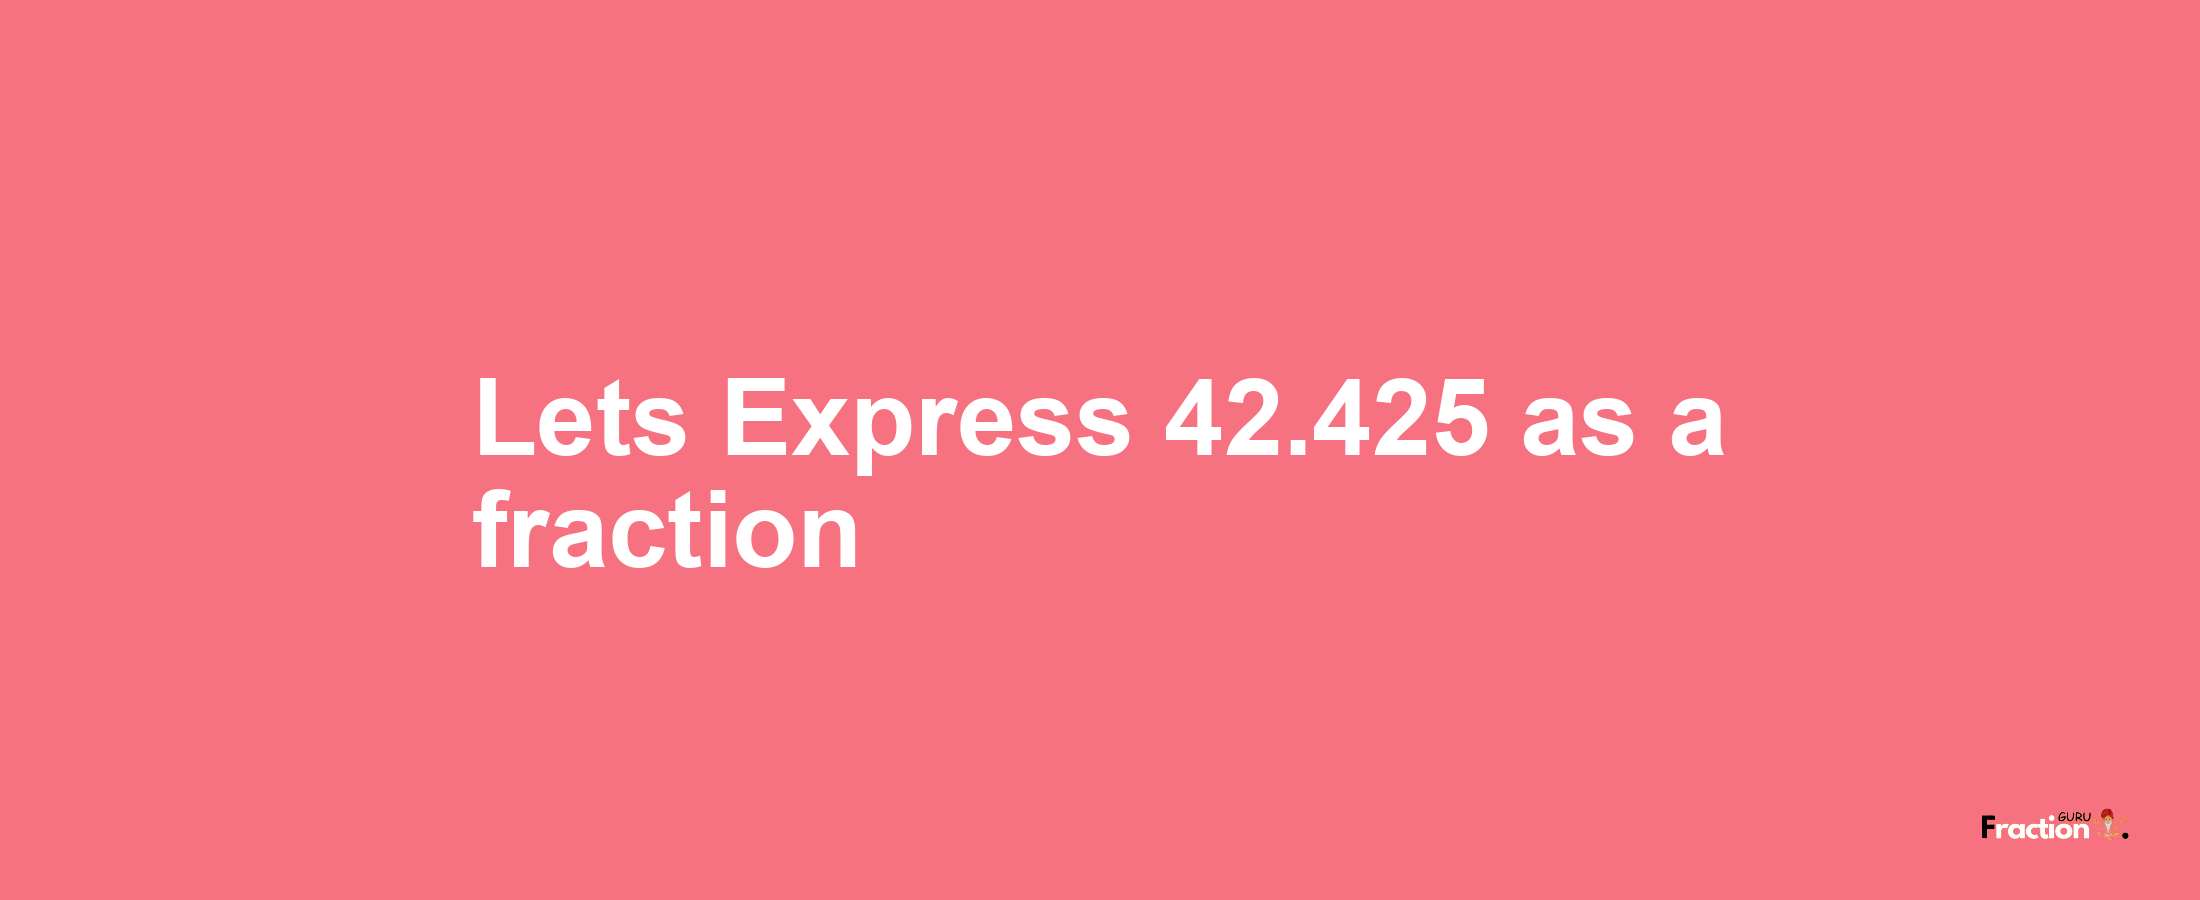 Lets Express 42.425 as afraction